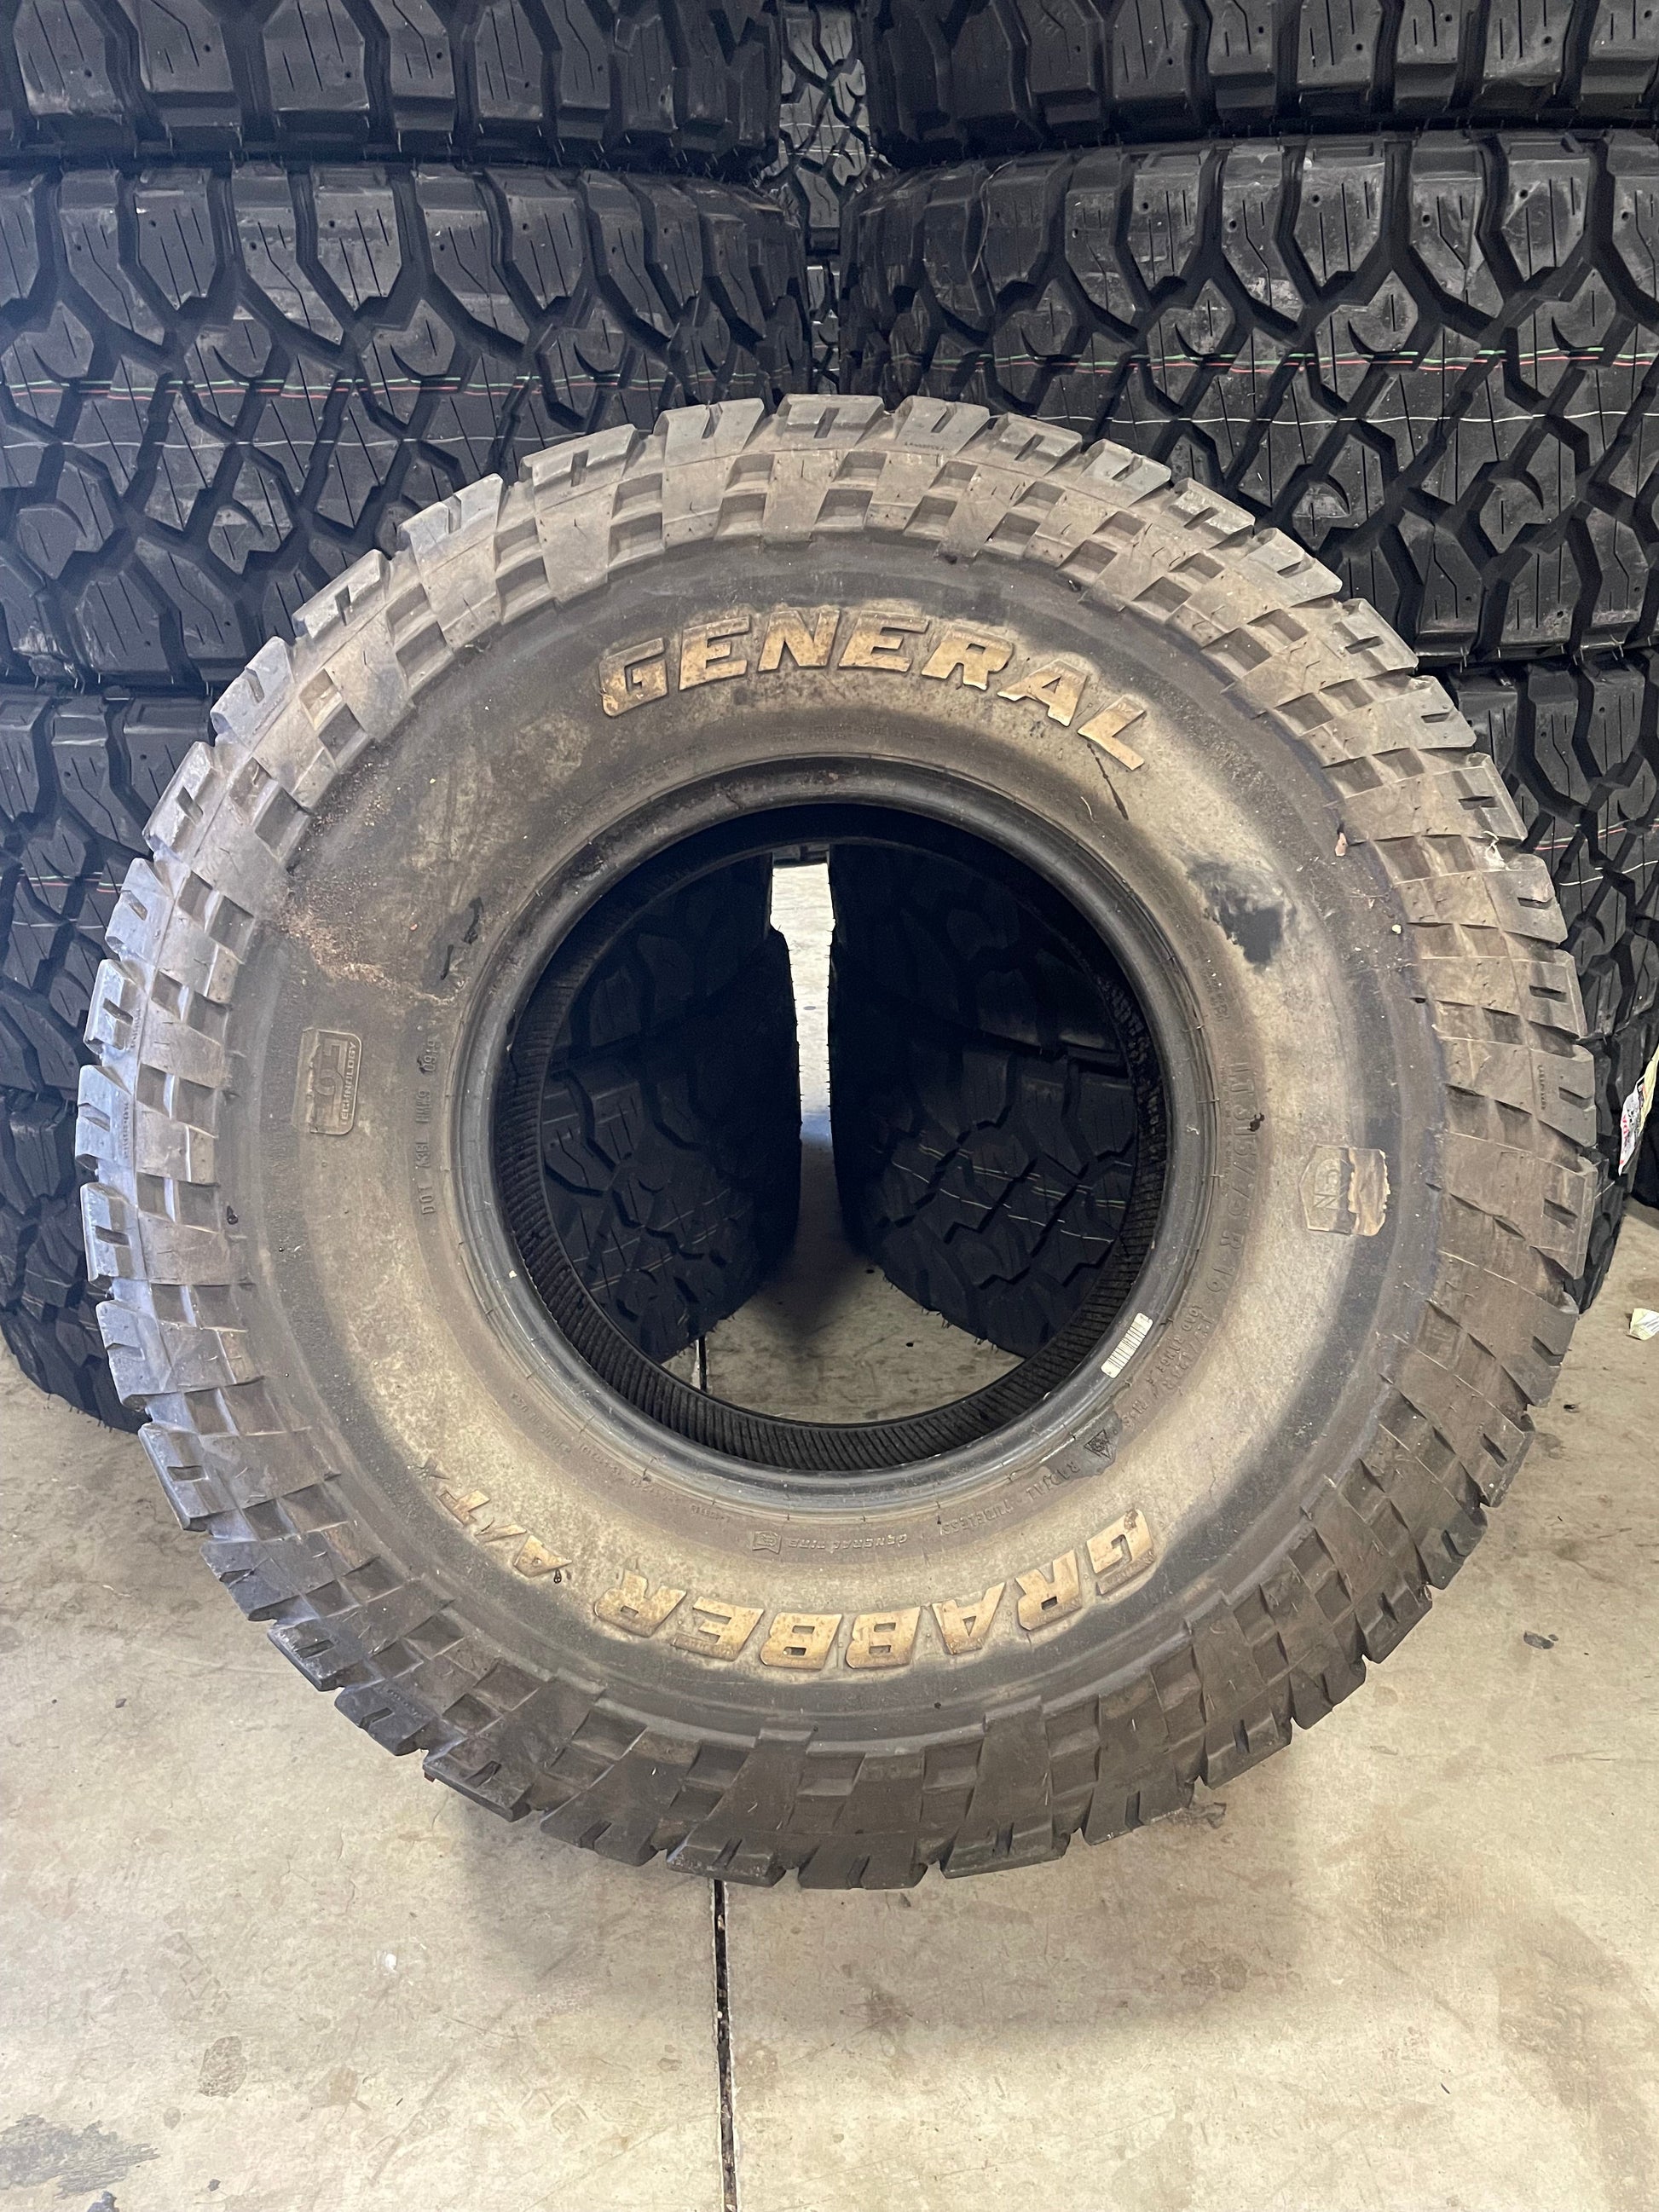 PAIR OF 315/75R16 General Grabber A/T 127/124 R E - Used Tires